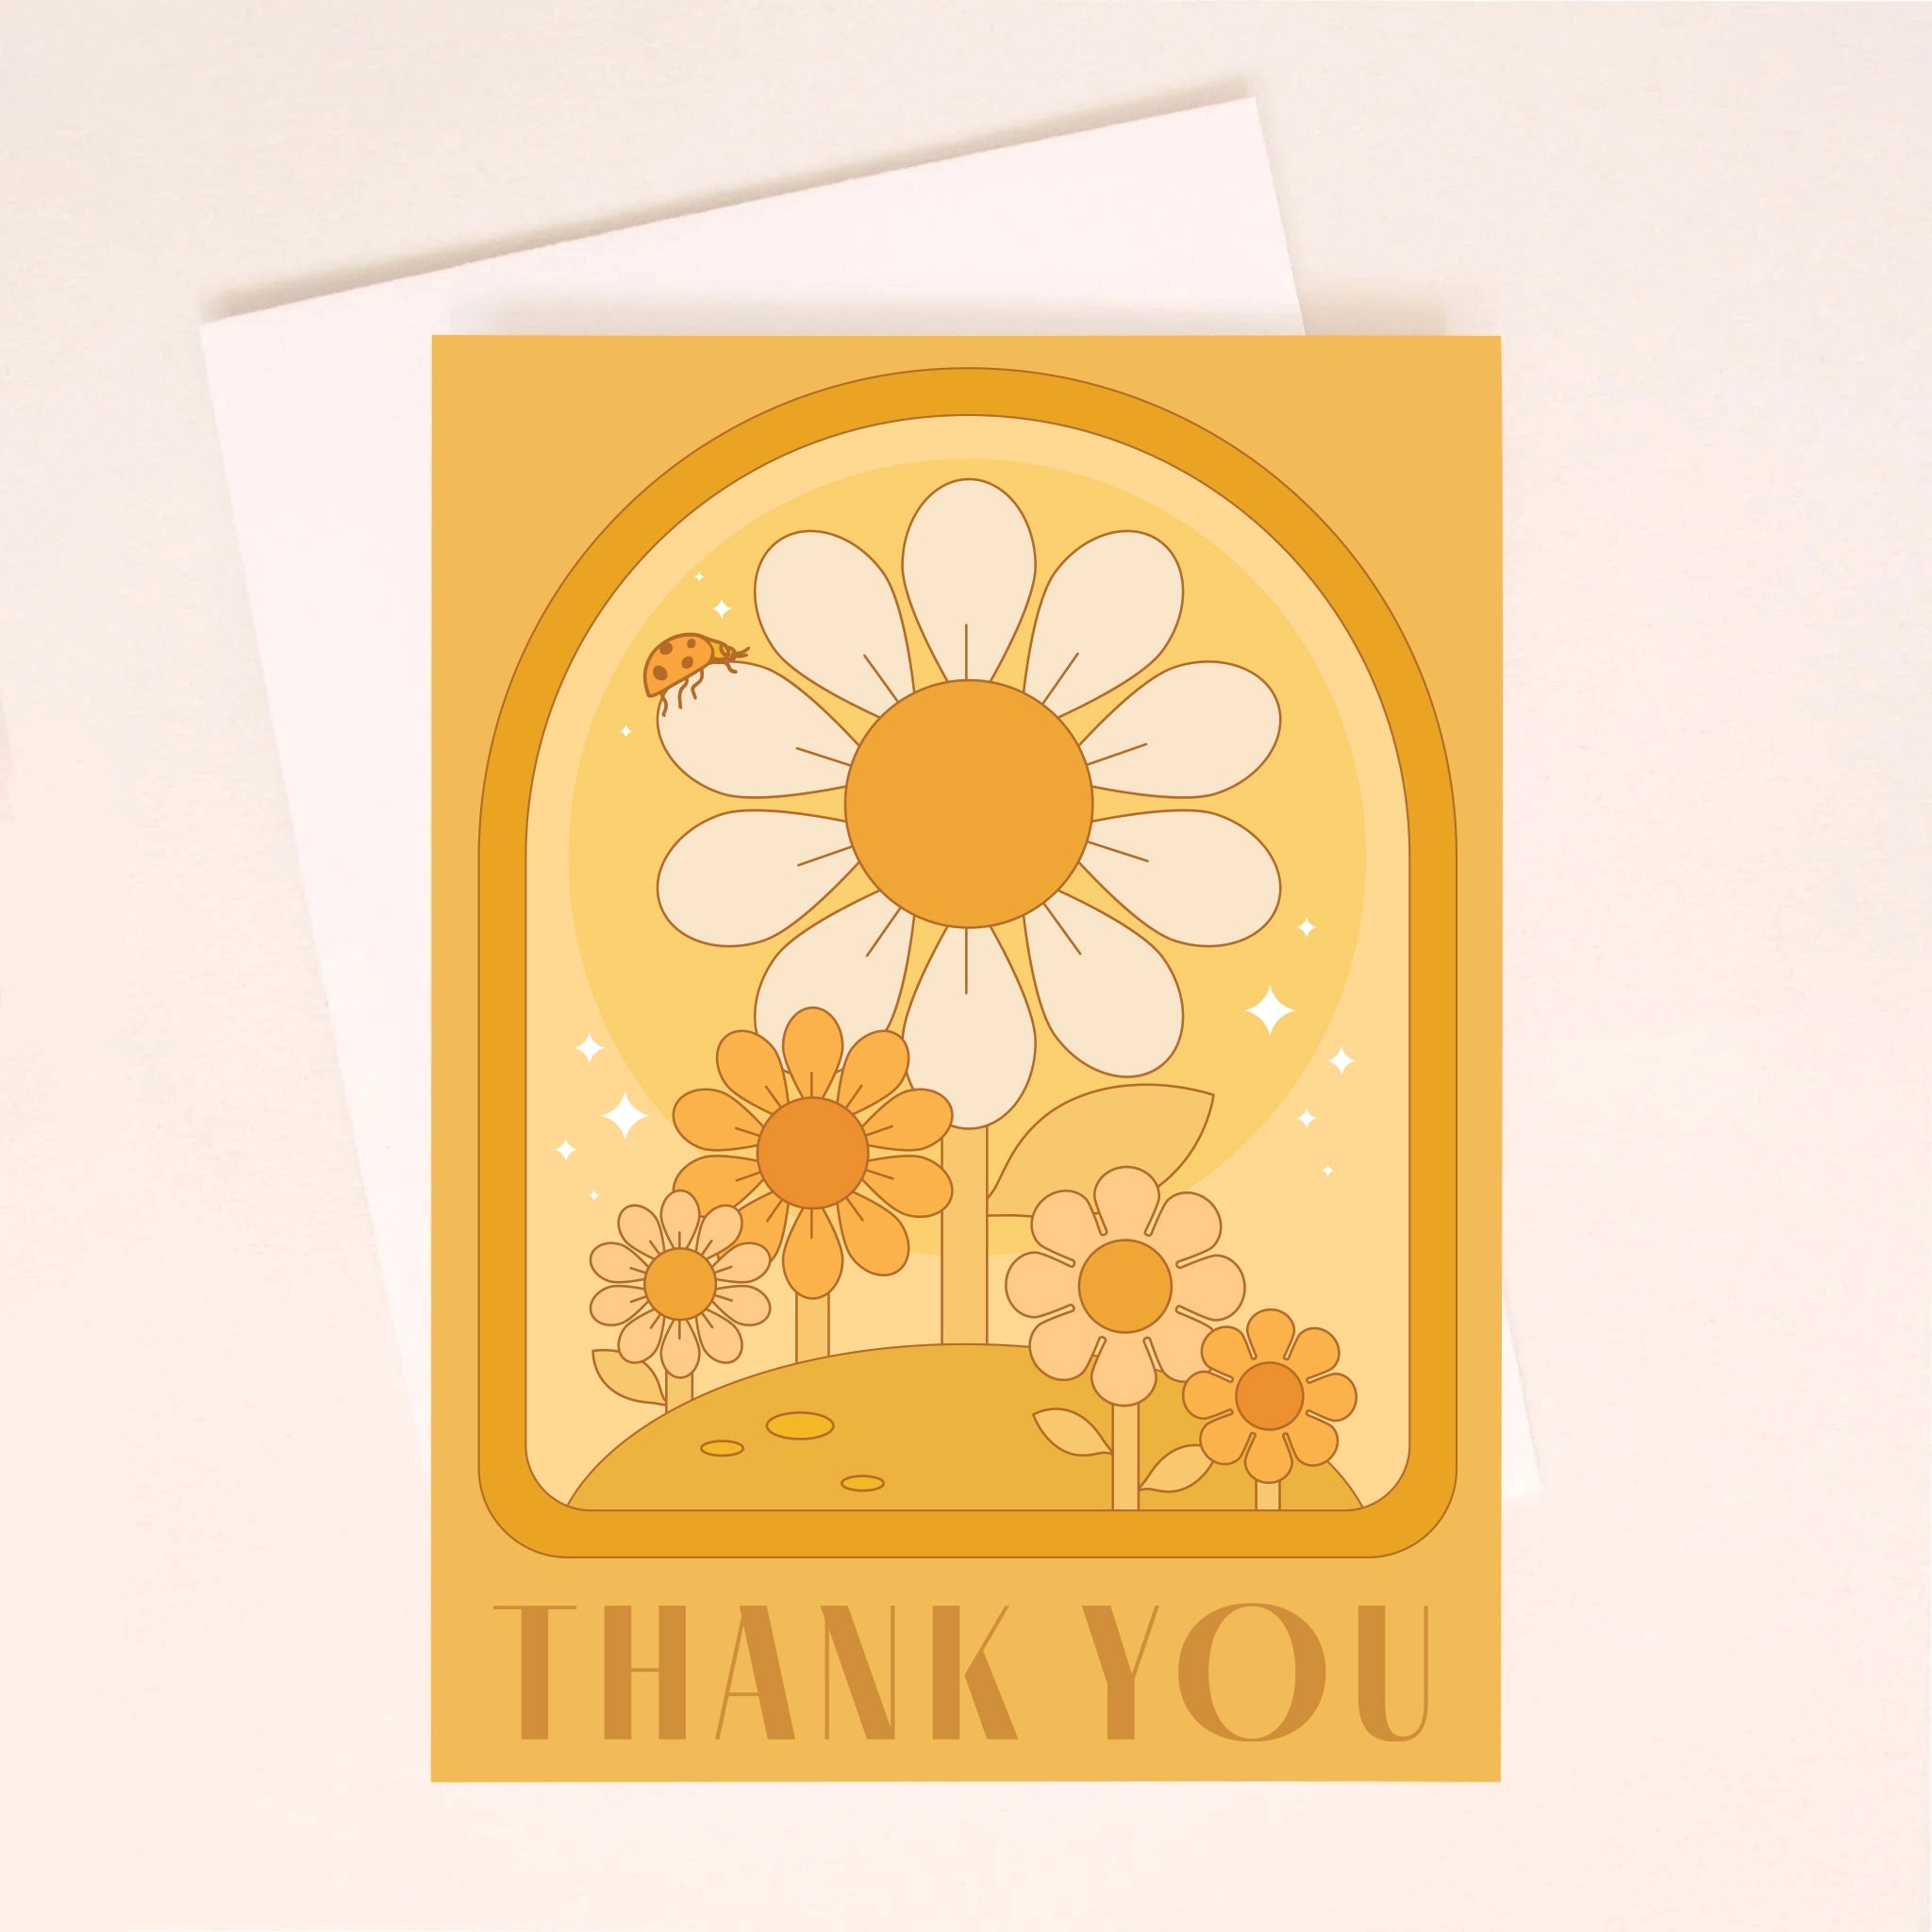 On an ivory background is an orange greeting card with an arch and daisy design with a small ladybug sitting on the largest daisy as well as dark orange text along the bottom the reads, &quot;Thank You&quot;.